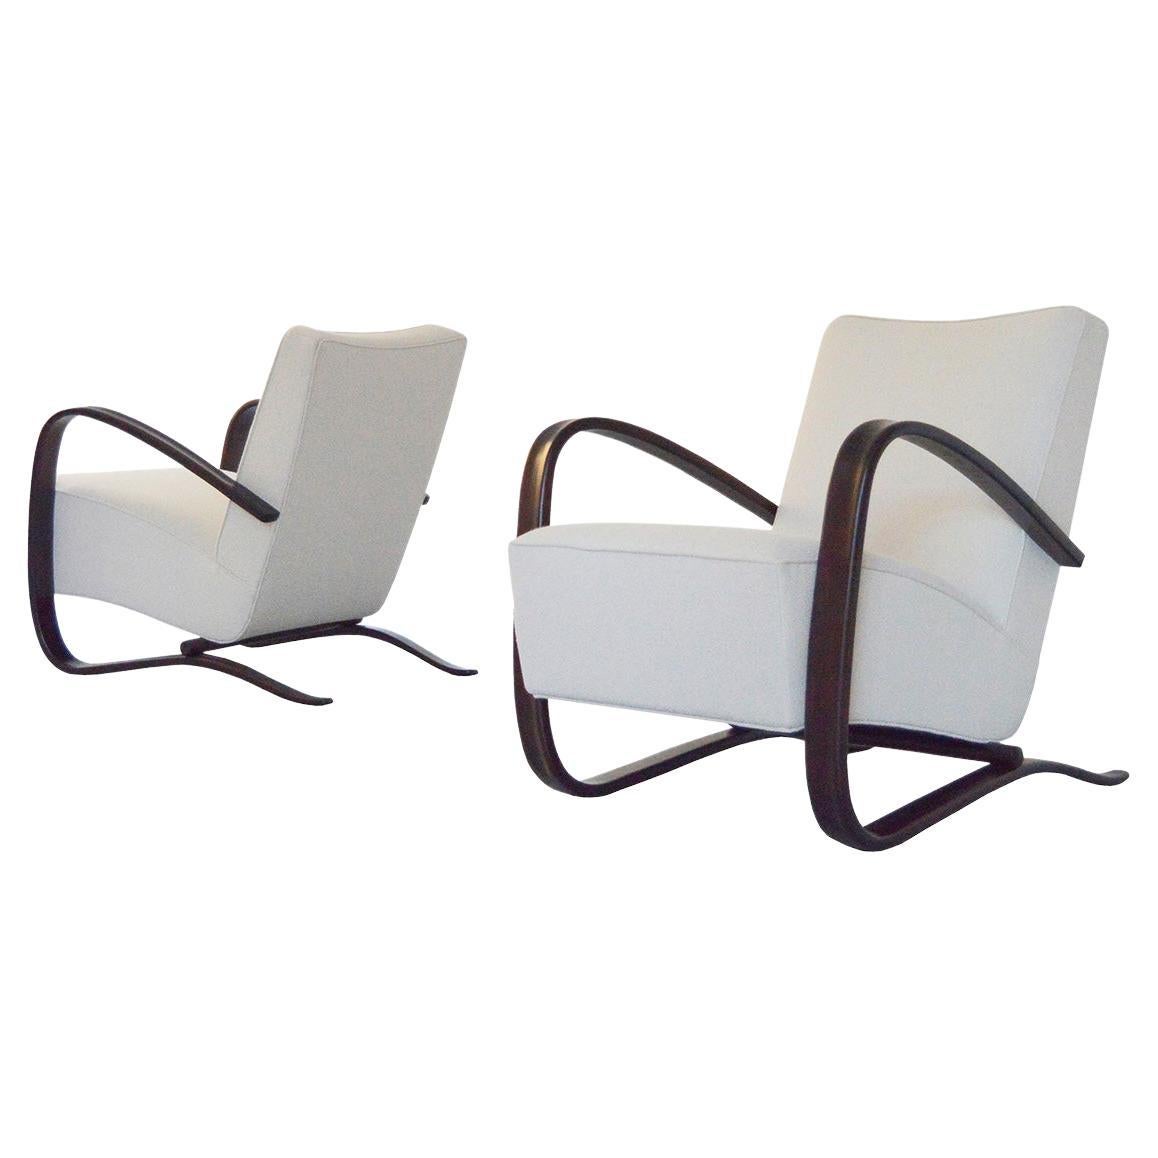 Jindrich Halabala Pair of Model H-269 Lounge Chairs in Cream Upholstery, 1930s